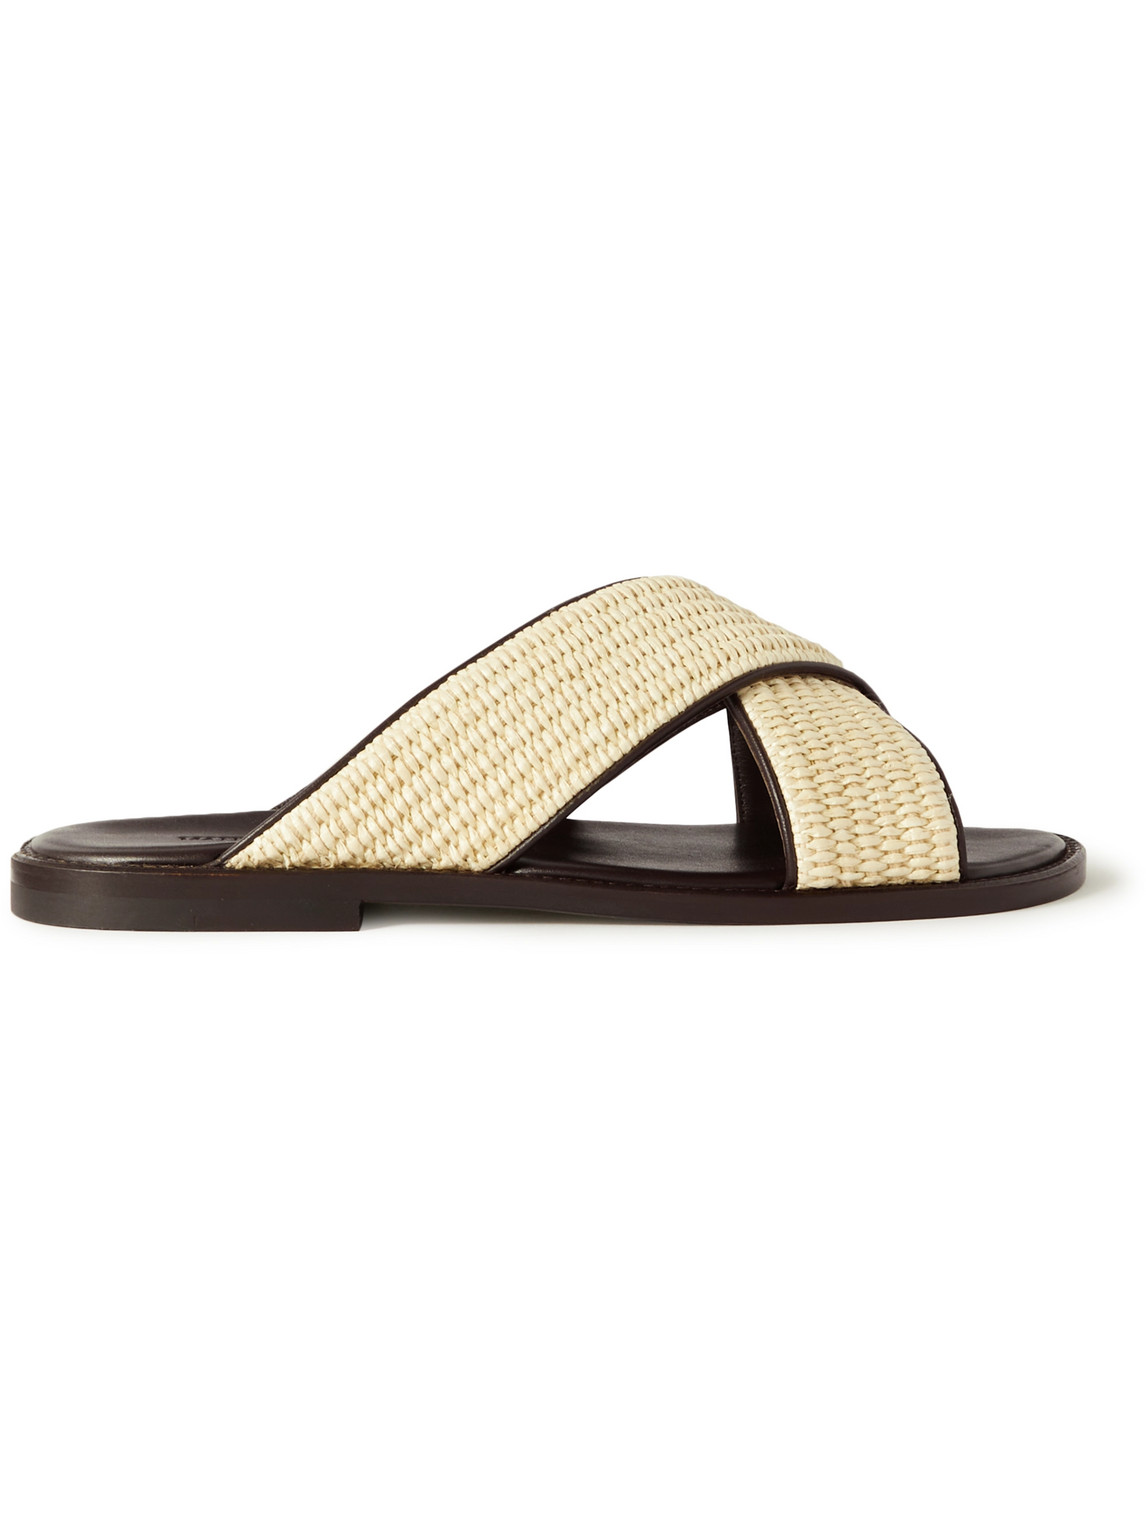 Otawi Woven Raffia and Leather Sandals